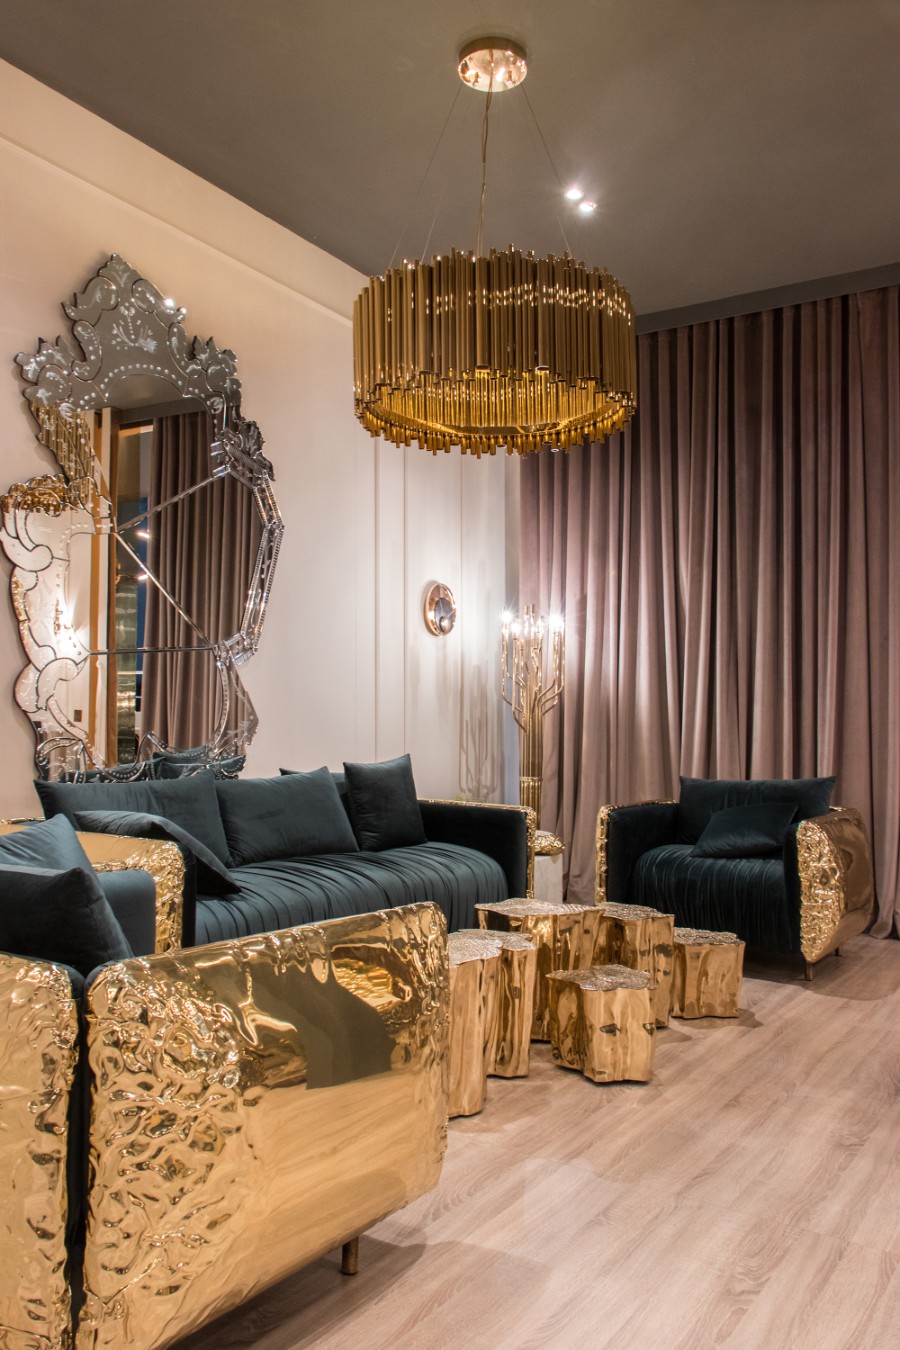 Find Out What Happened During Milan Design Week